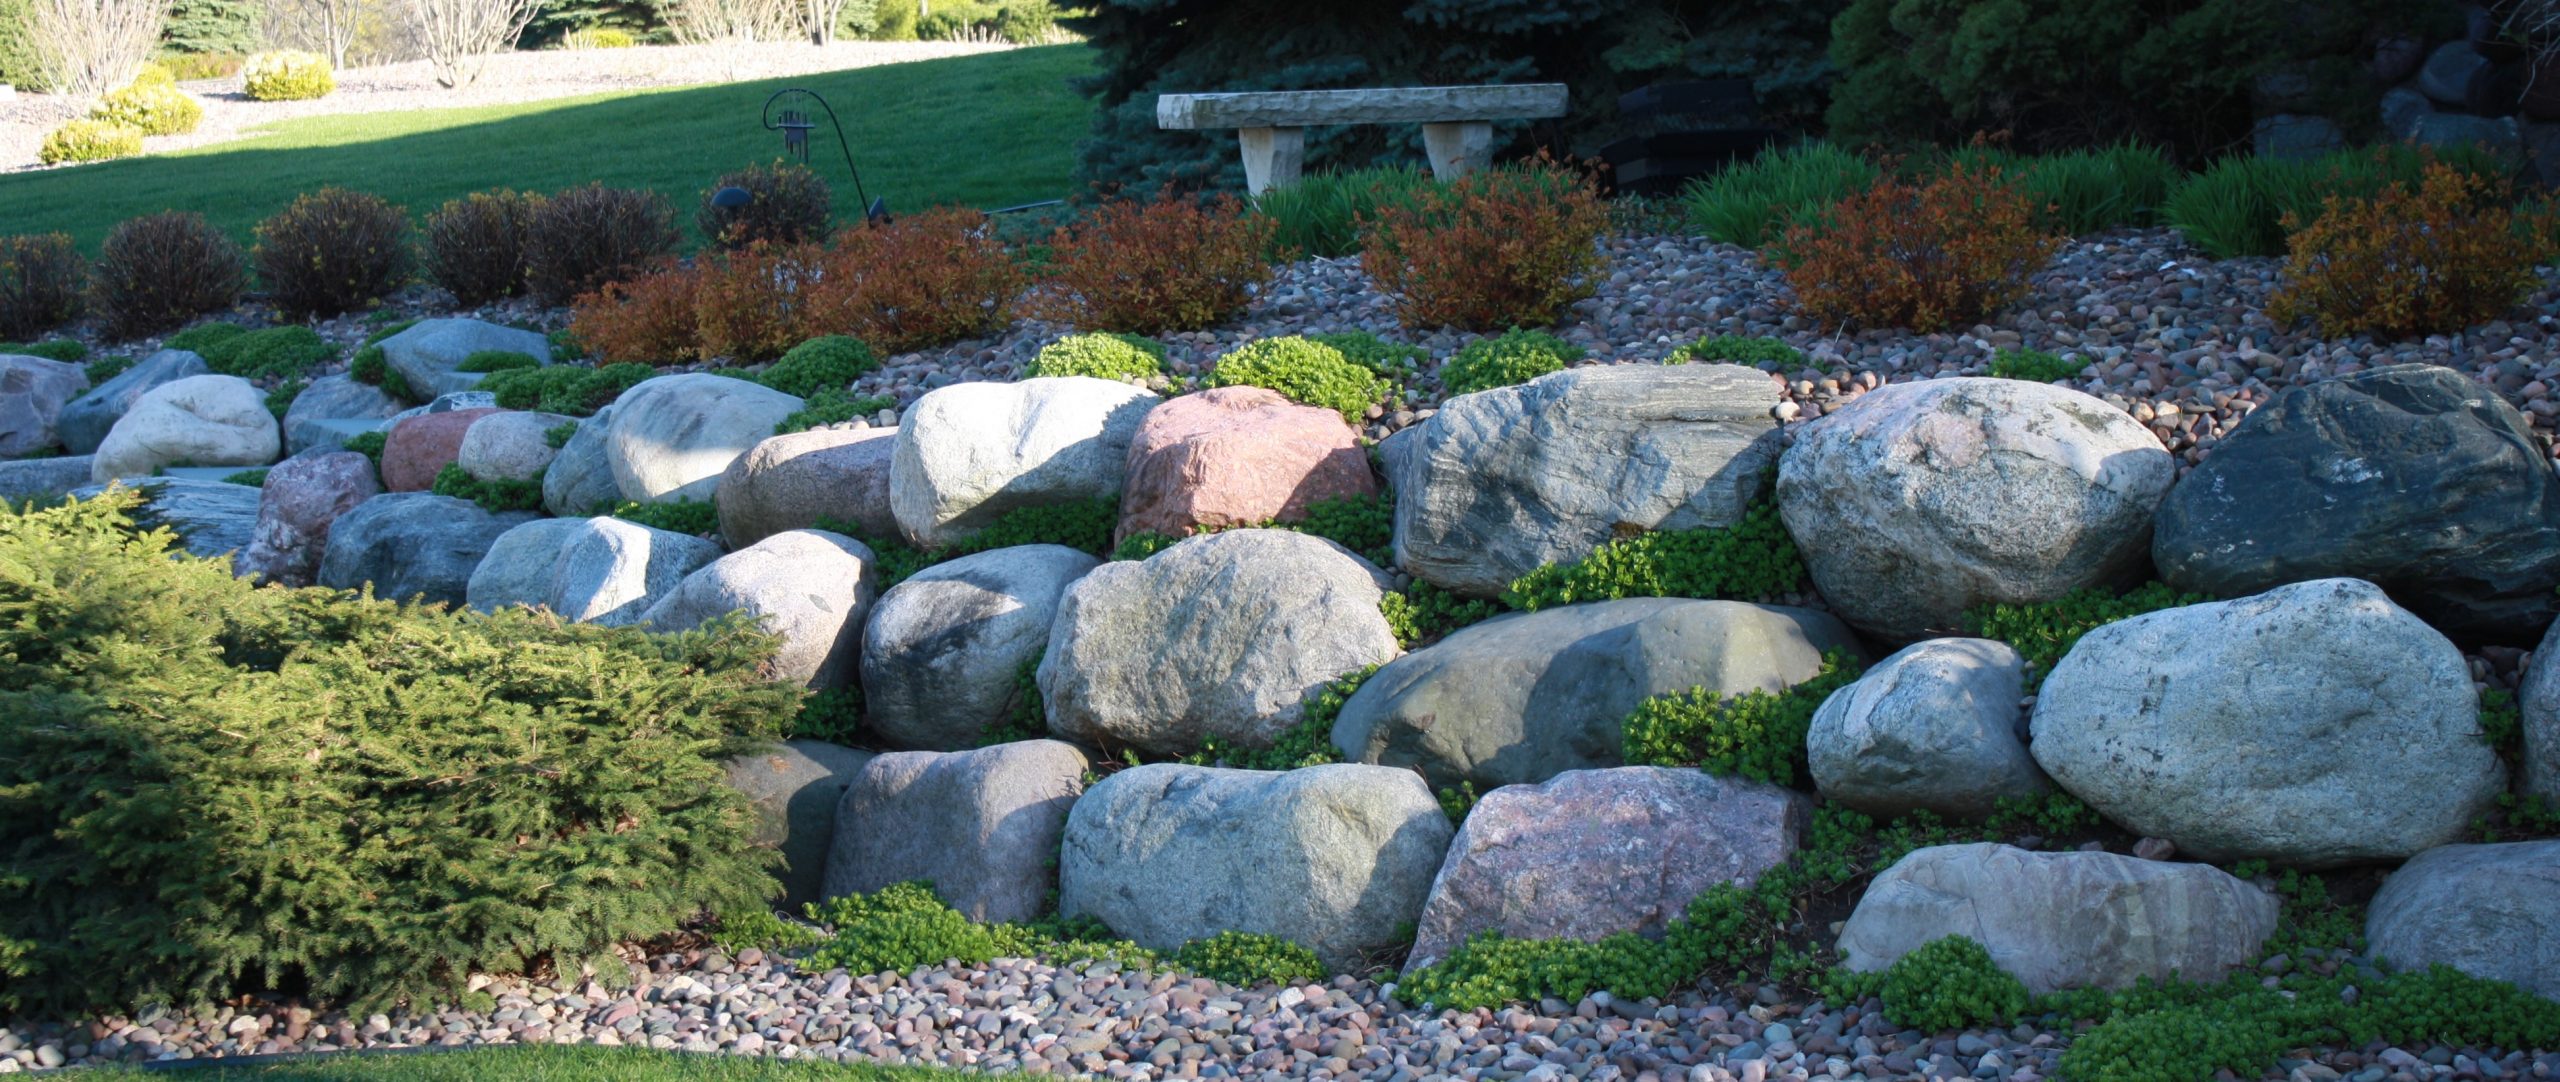 Wisconsin Granite Boulders Lemke, How To Landscape With Boulders